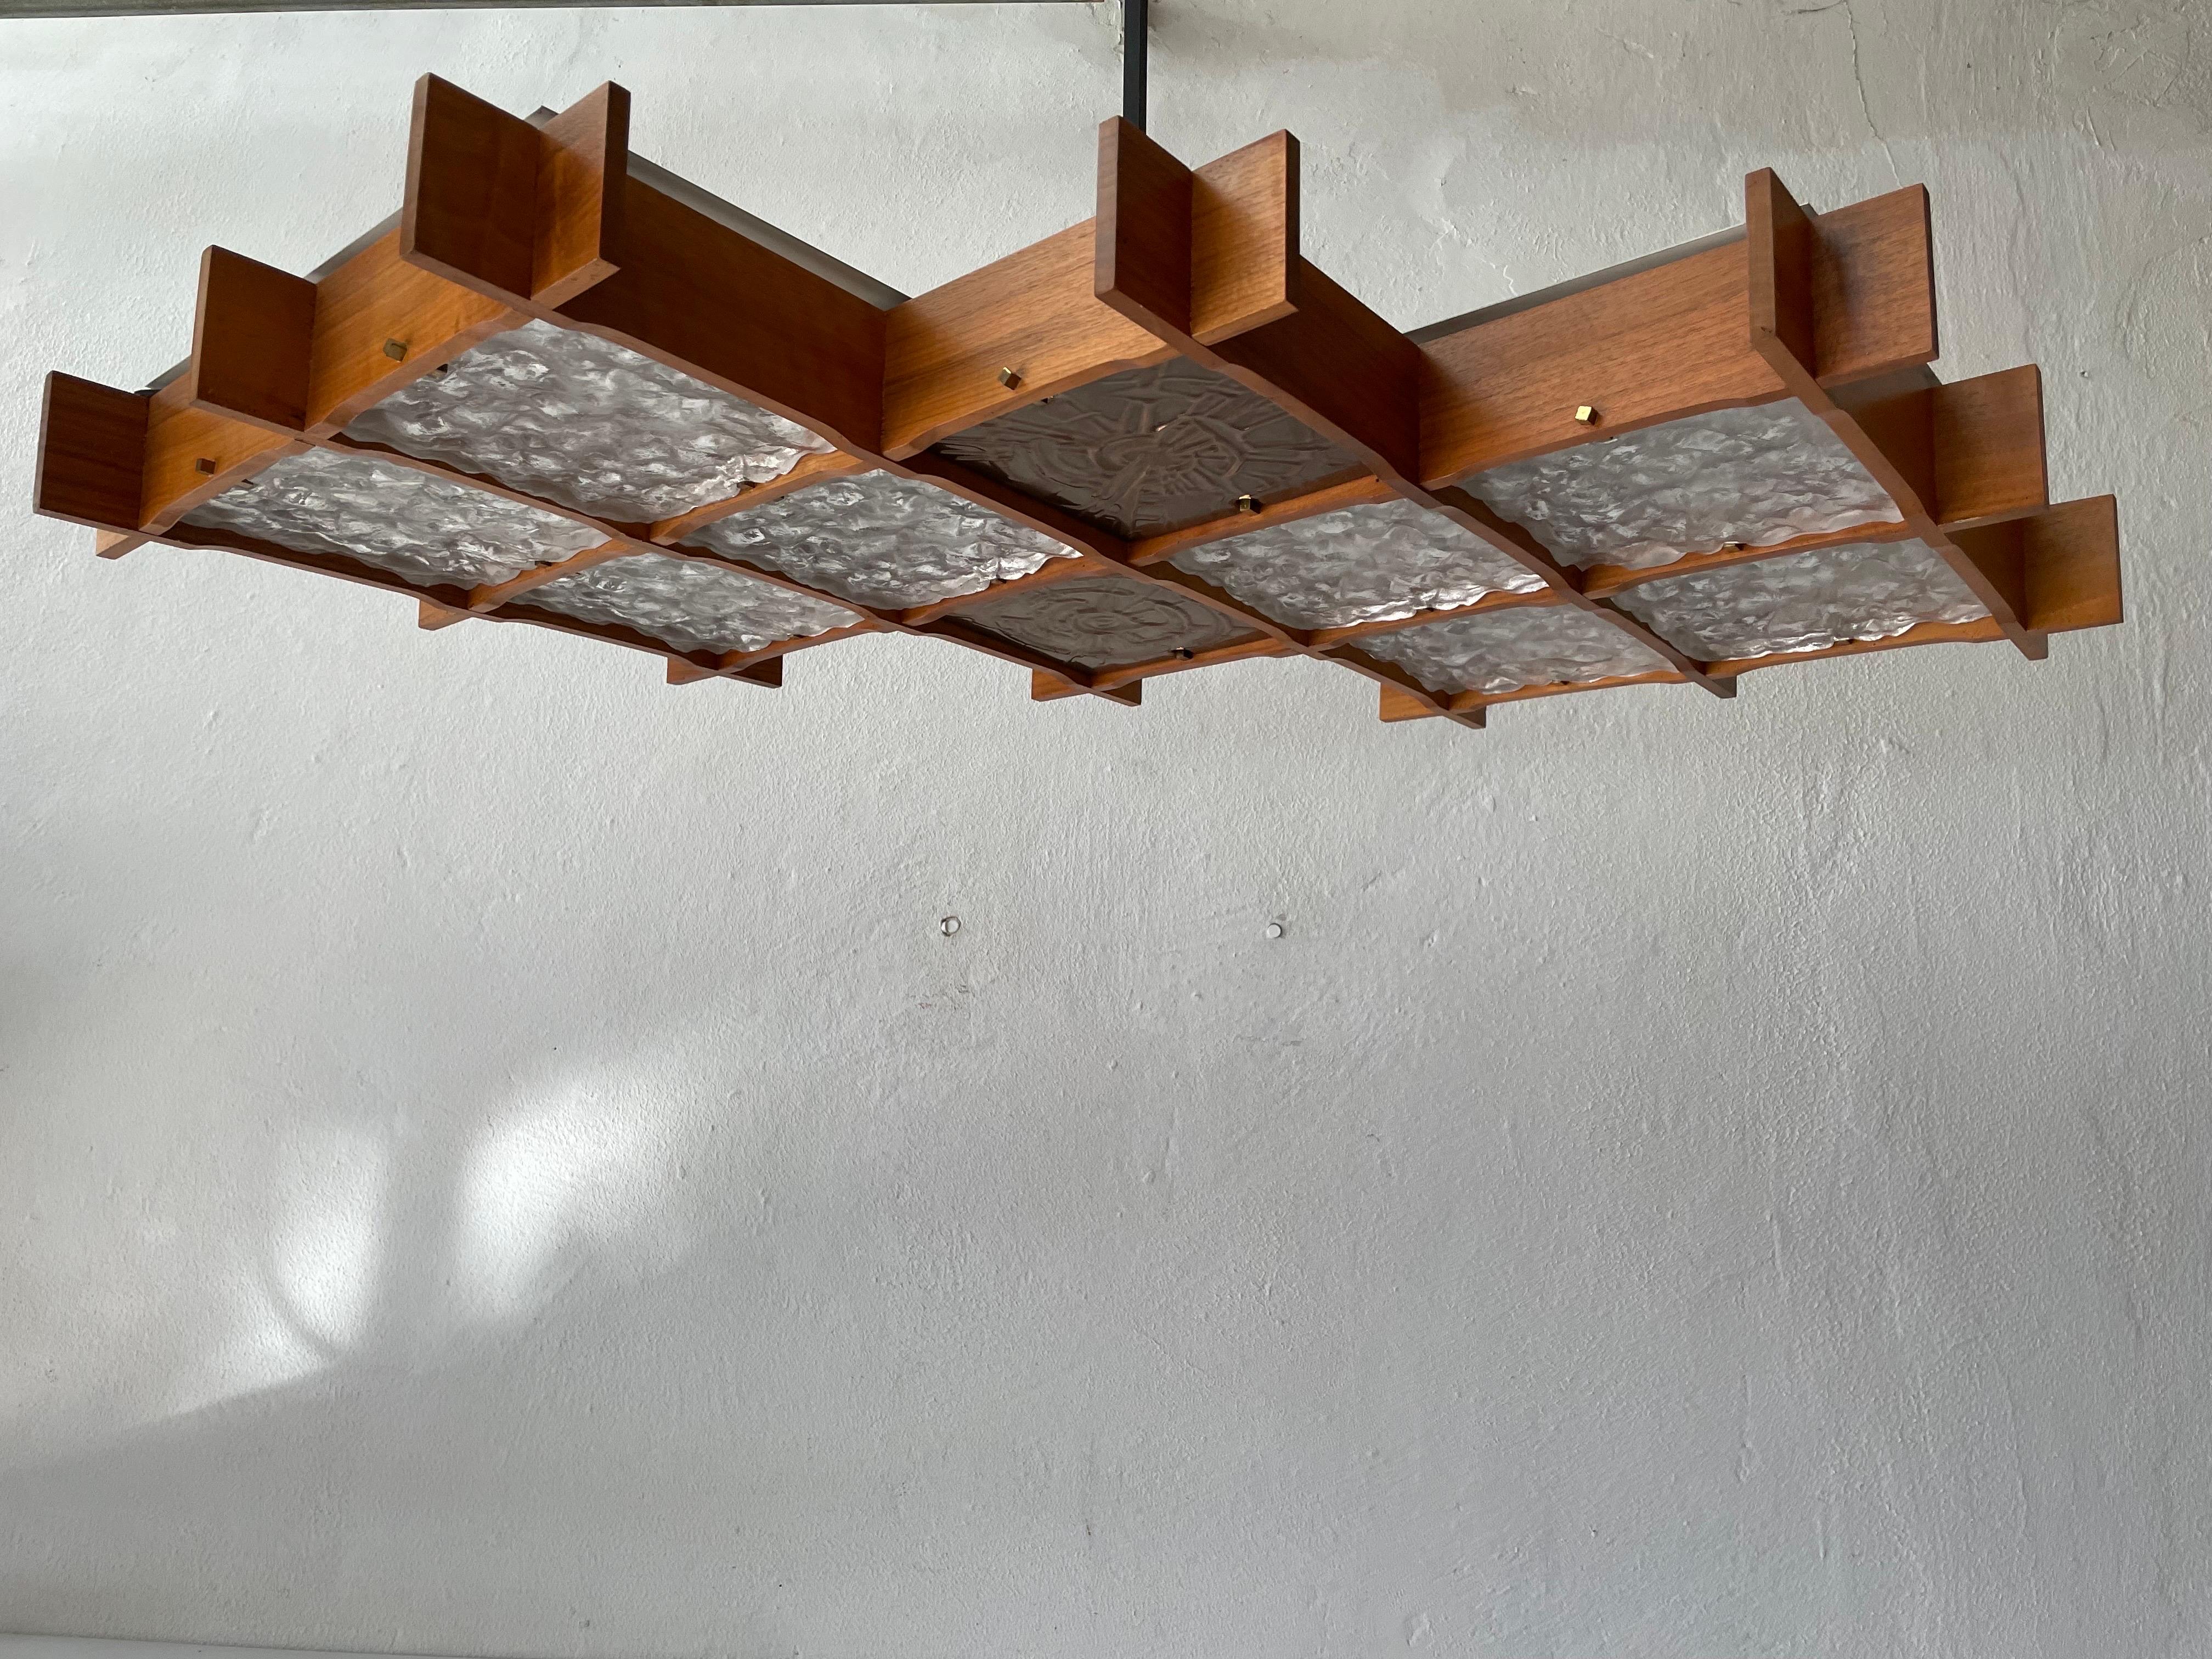 Wood and textured glass heavy ceiling lamp, 1960s, Germany

Lampshade is in good condition and very clean. 
This lamp works with 10 x E27 light bulb. 
Wired and suitable to use with 220V and 110V for all countries.

Measures: 

shade: 105 cm